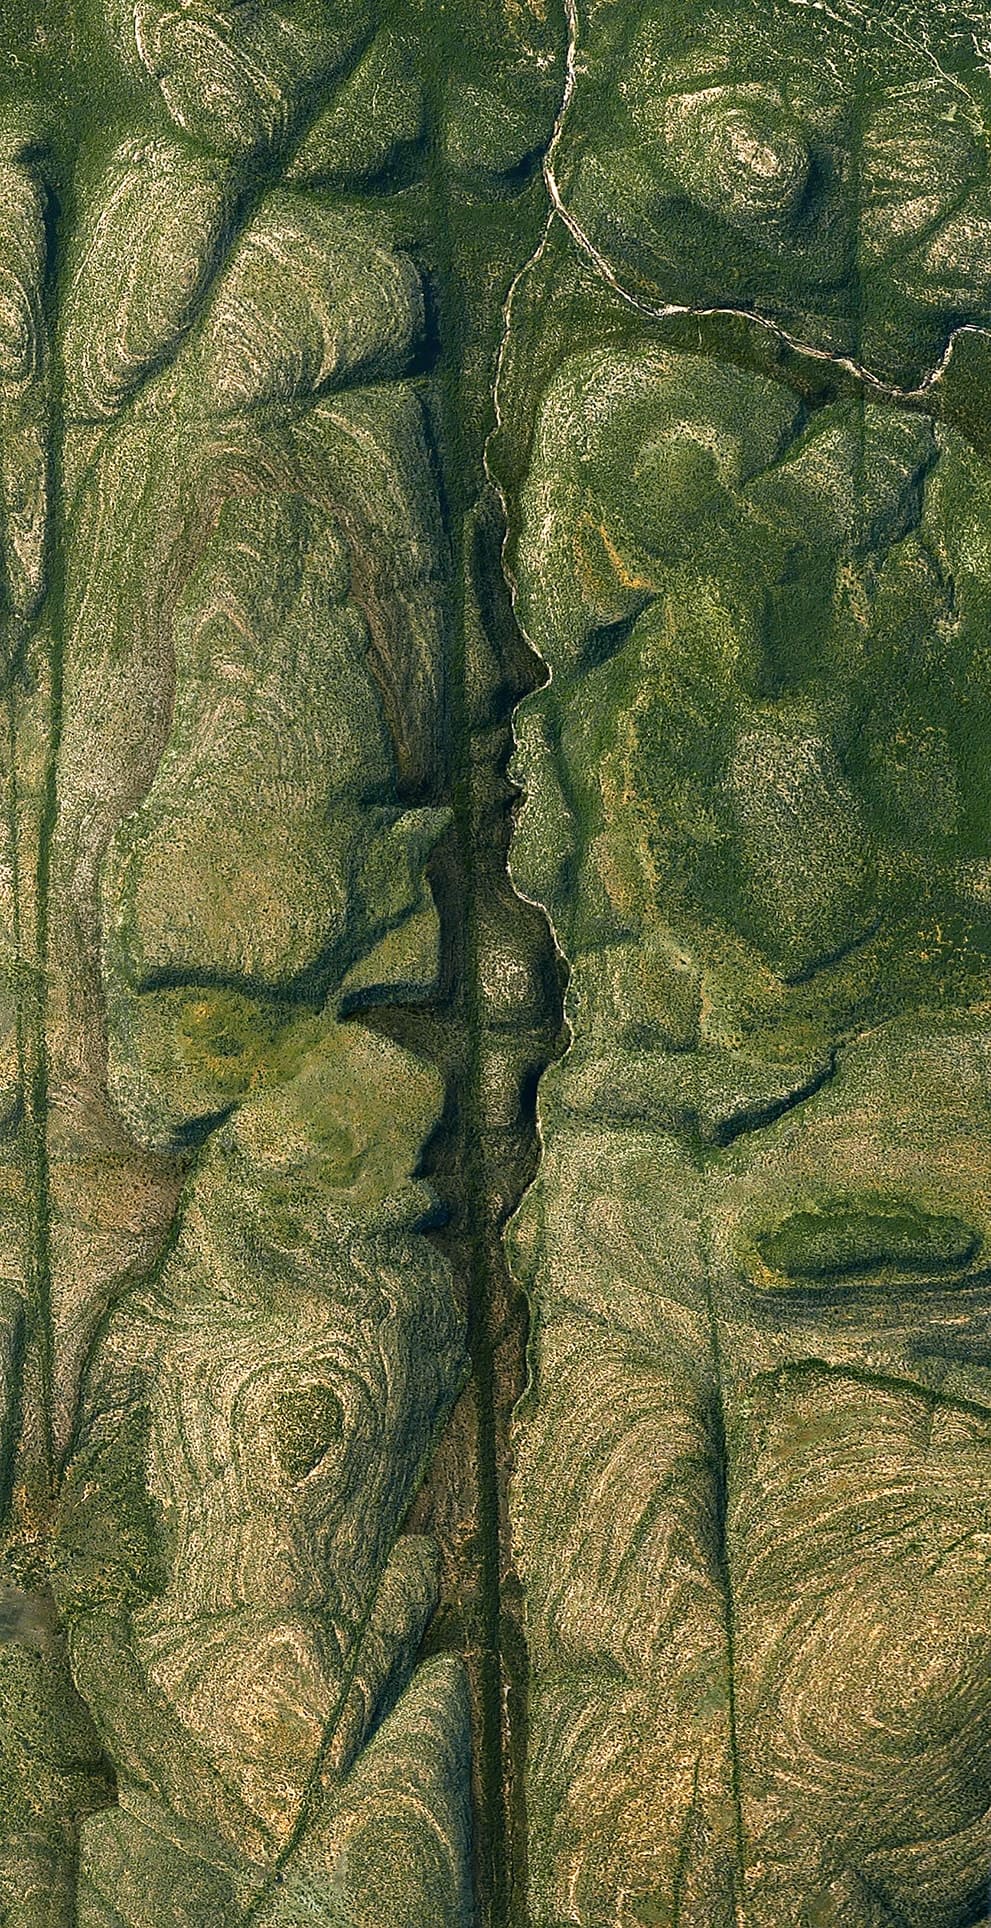 EARTH PORTRAIT 18 SOUTH AFRICA, 2015, SATELLITE PHOTOGRAPHY, CM 70×36, limited edition 9